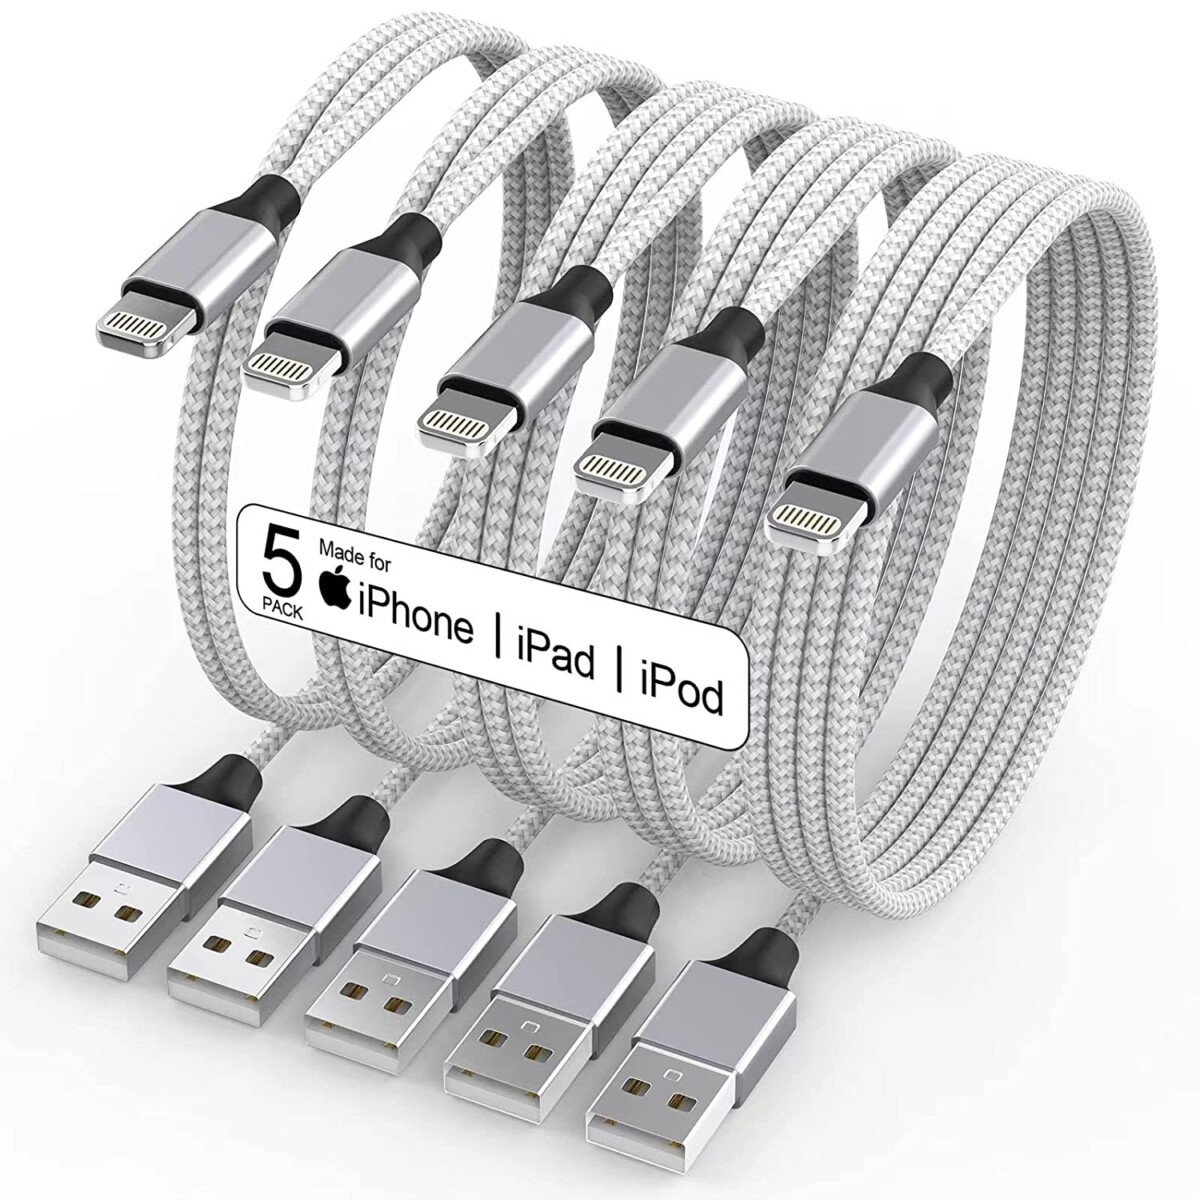 Alea's Deals Apple MFi Certified iPhone Charger, 5Pack(3/3/6/6/10 FT) Lightning Cable-80%OFF  